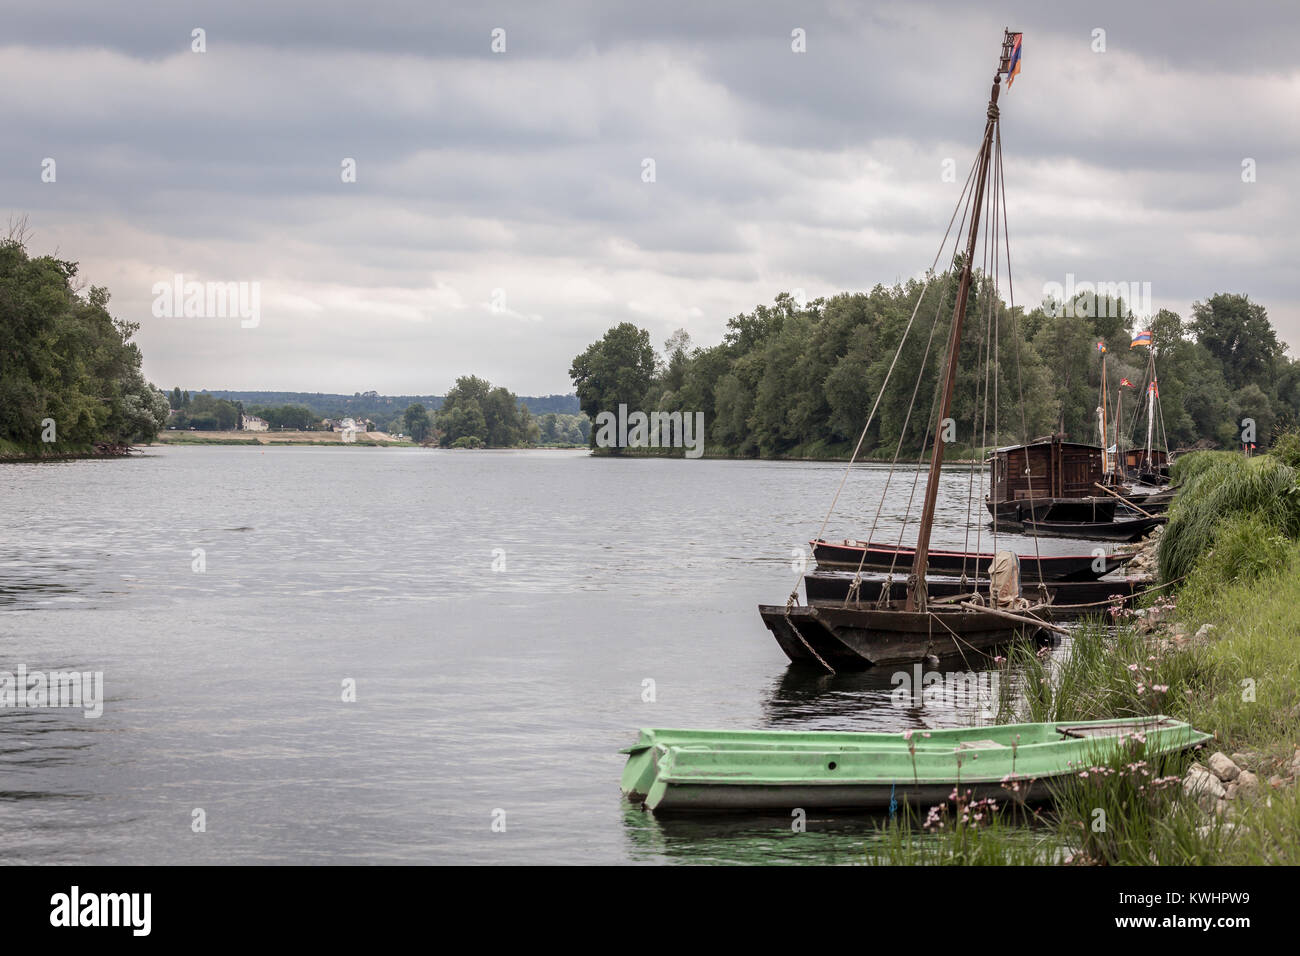 Boats on the Loire river, France, Europe. Stock Photo